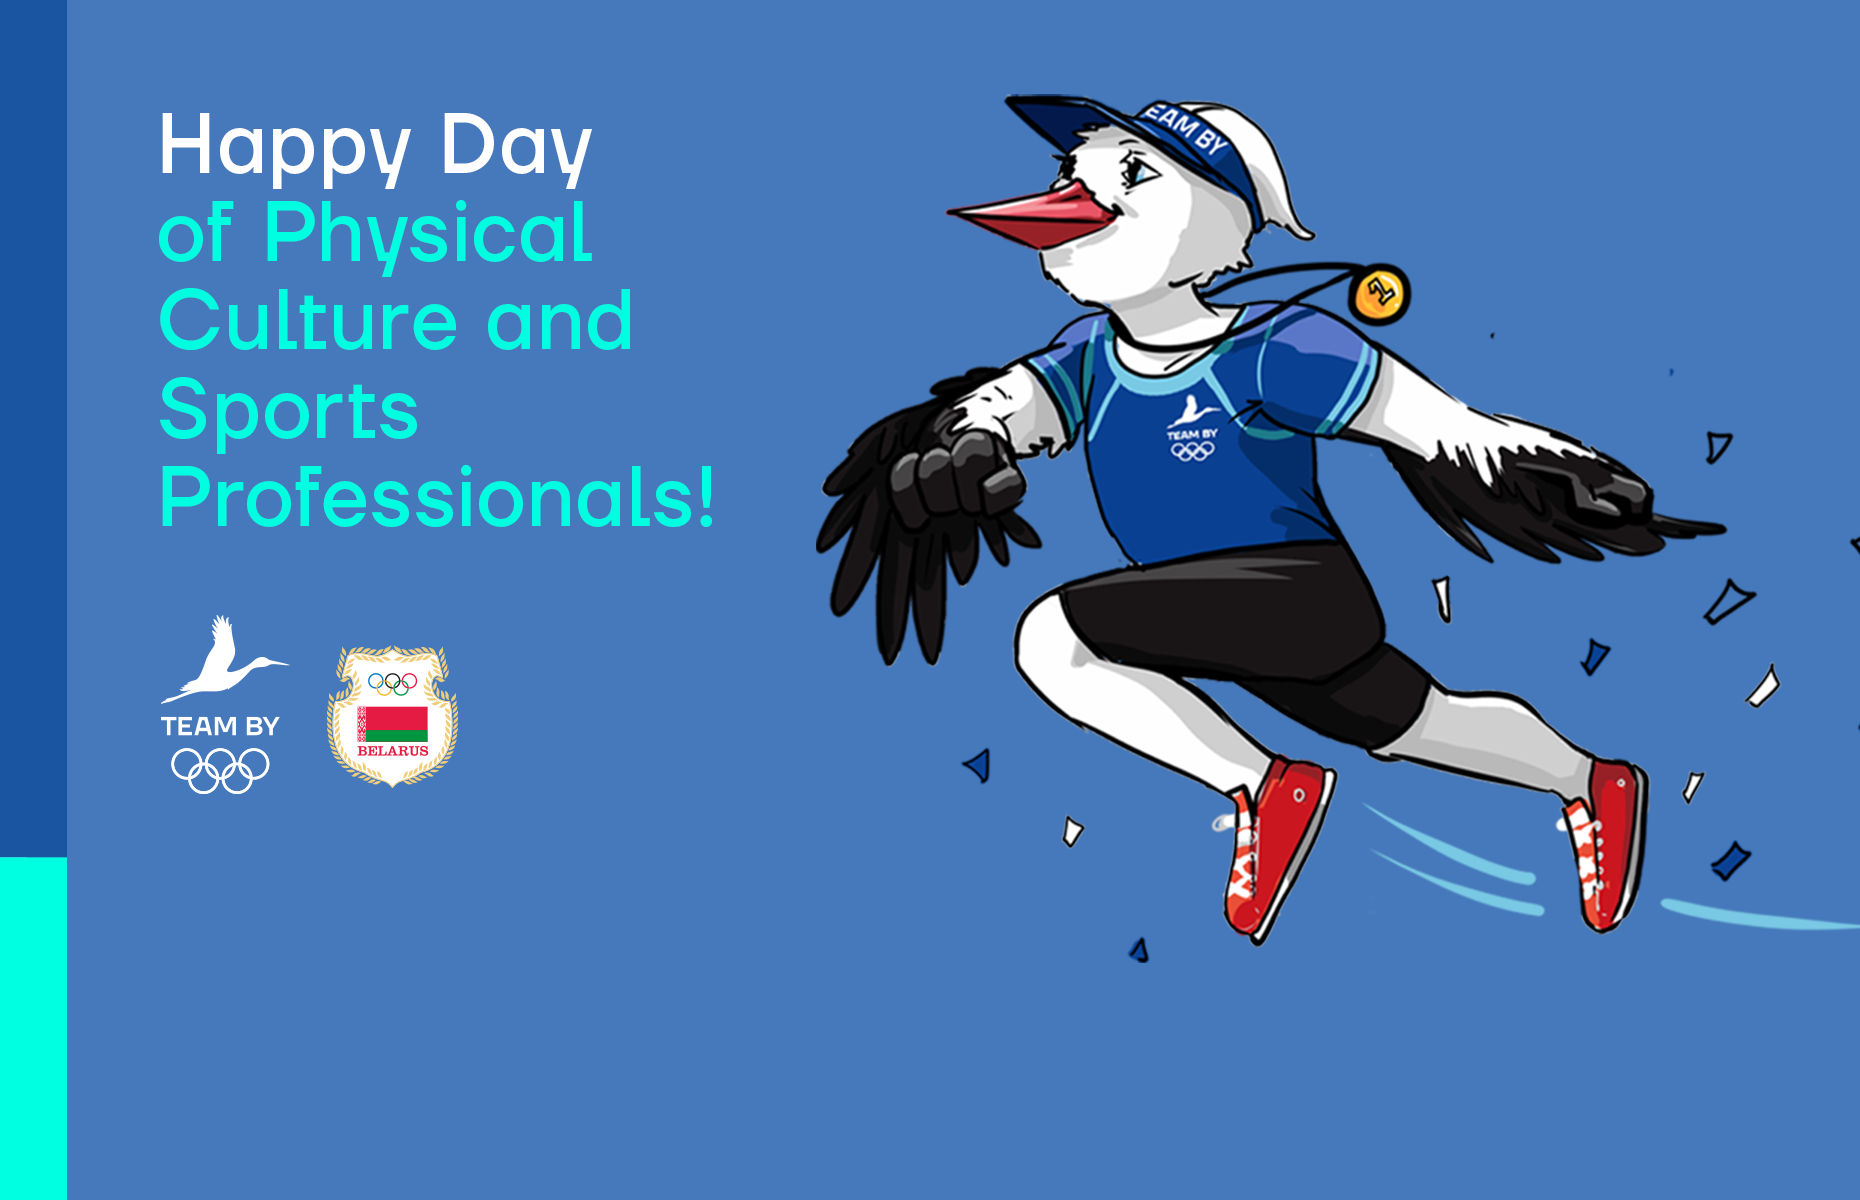 Happy Day of Physical Culture and Sports Professionals!